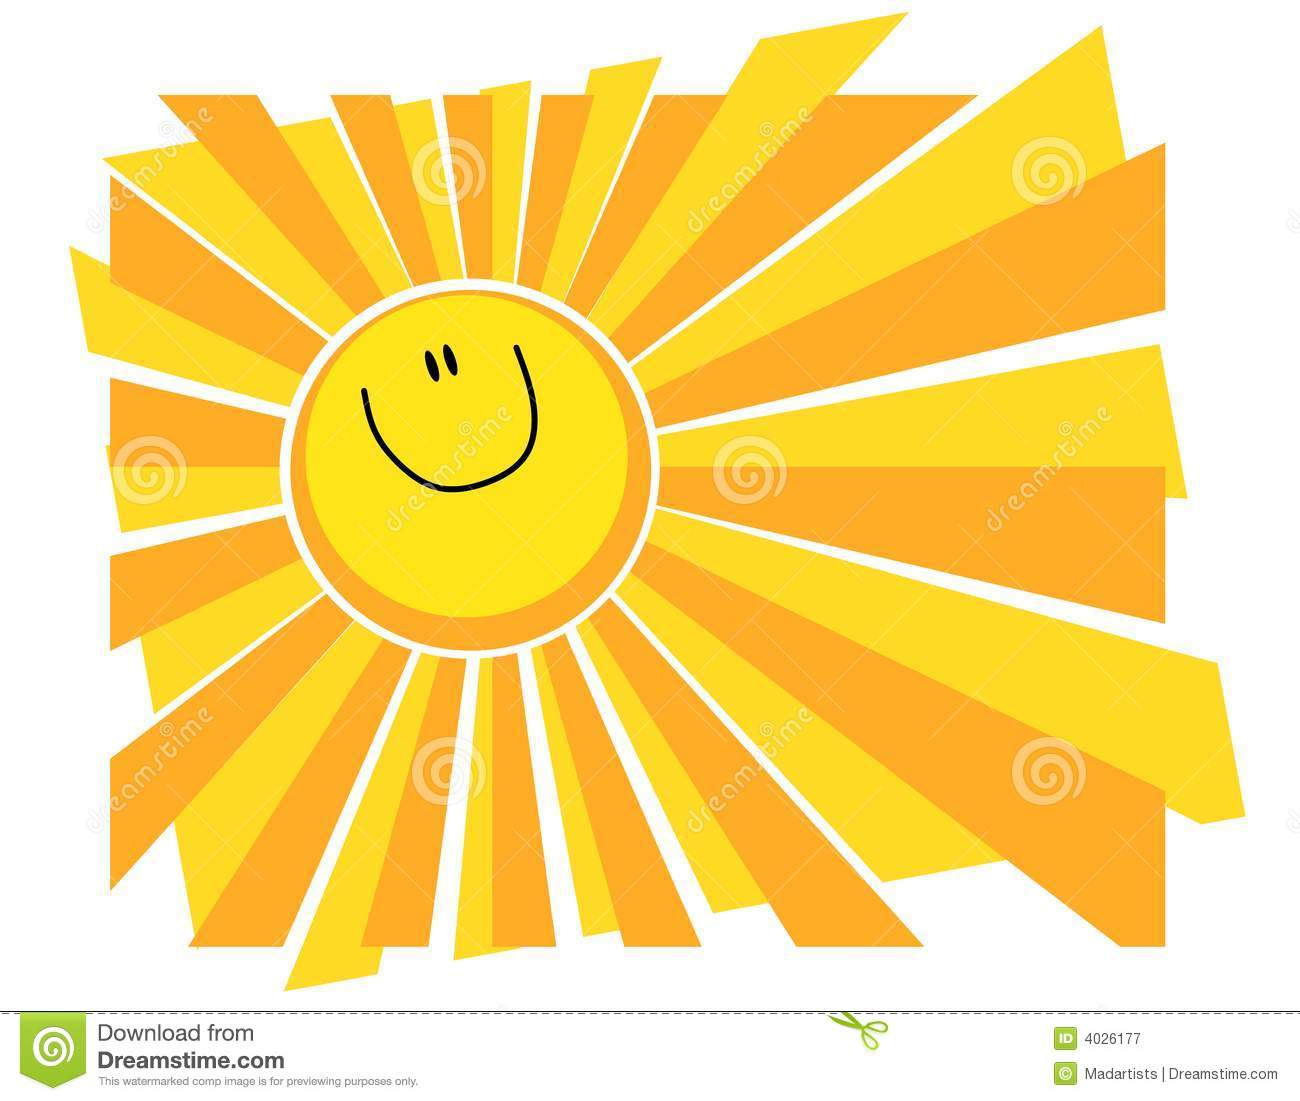 Illustration Featuring A Happy Smiling Sun With Rays Of Light Beaming